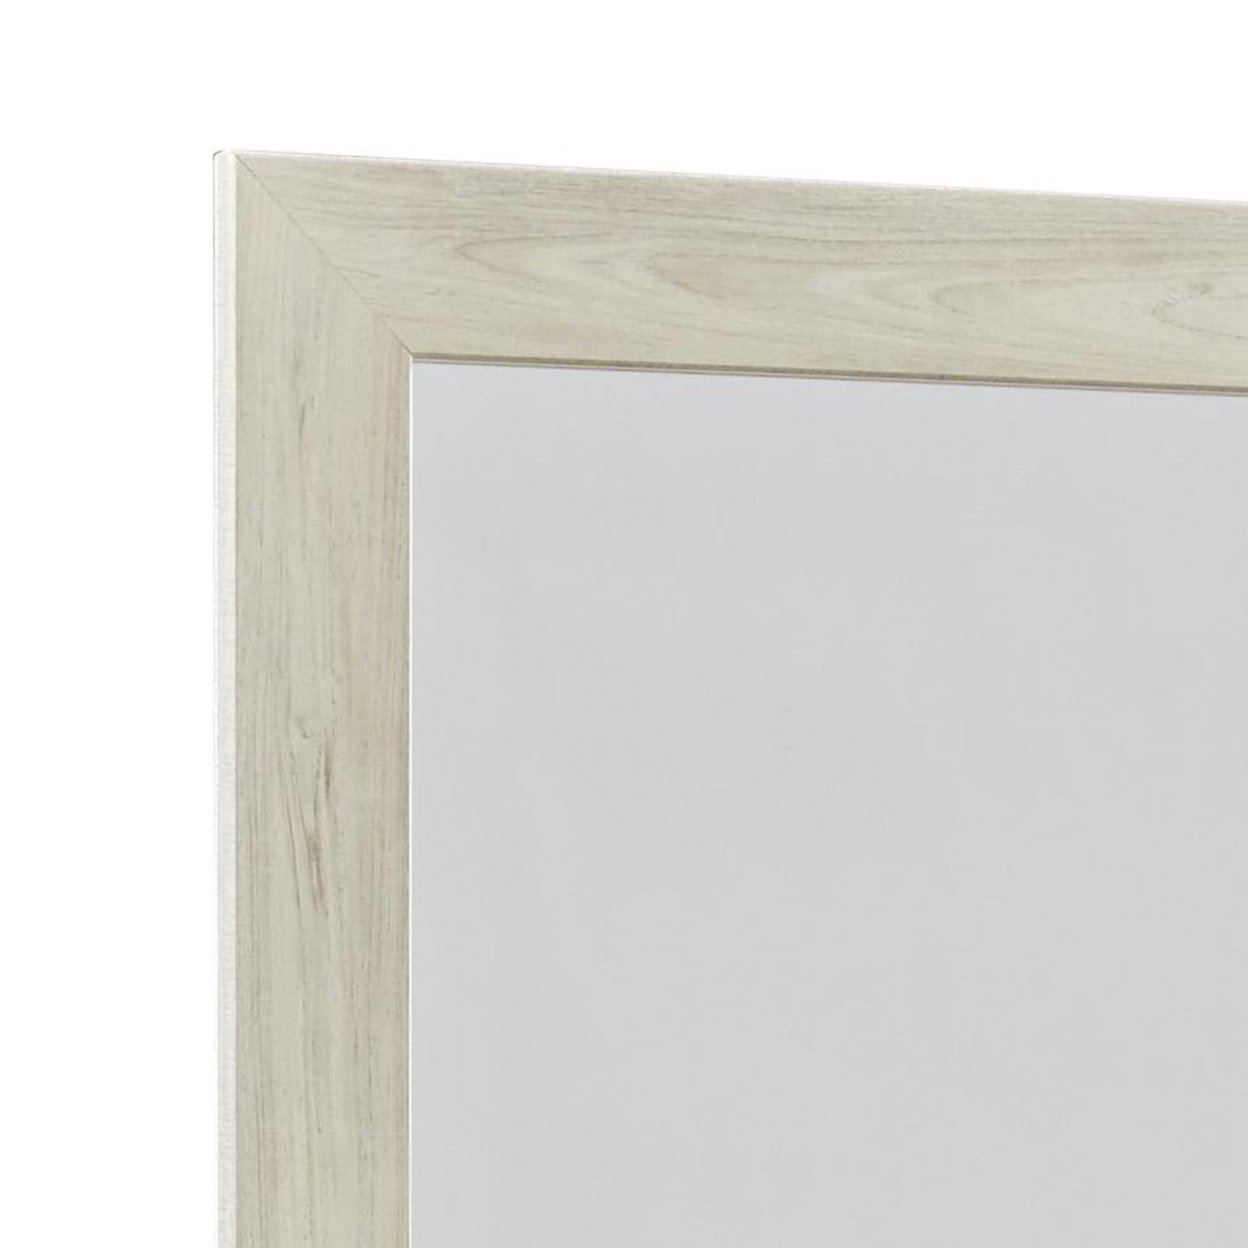 Contemporary Bedroom Mirror With Wood Grain Texture, White And Silver- Saltoro Sherpi